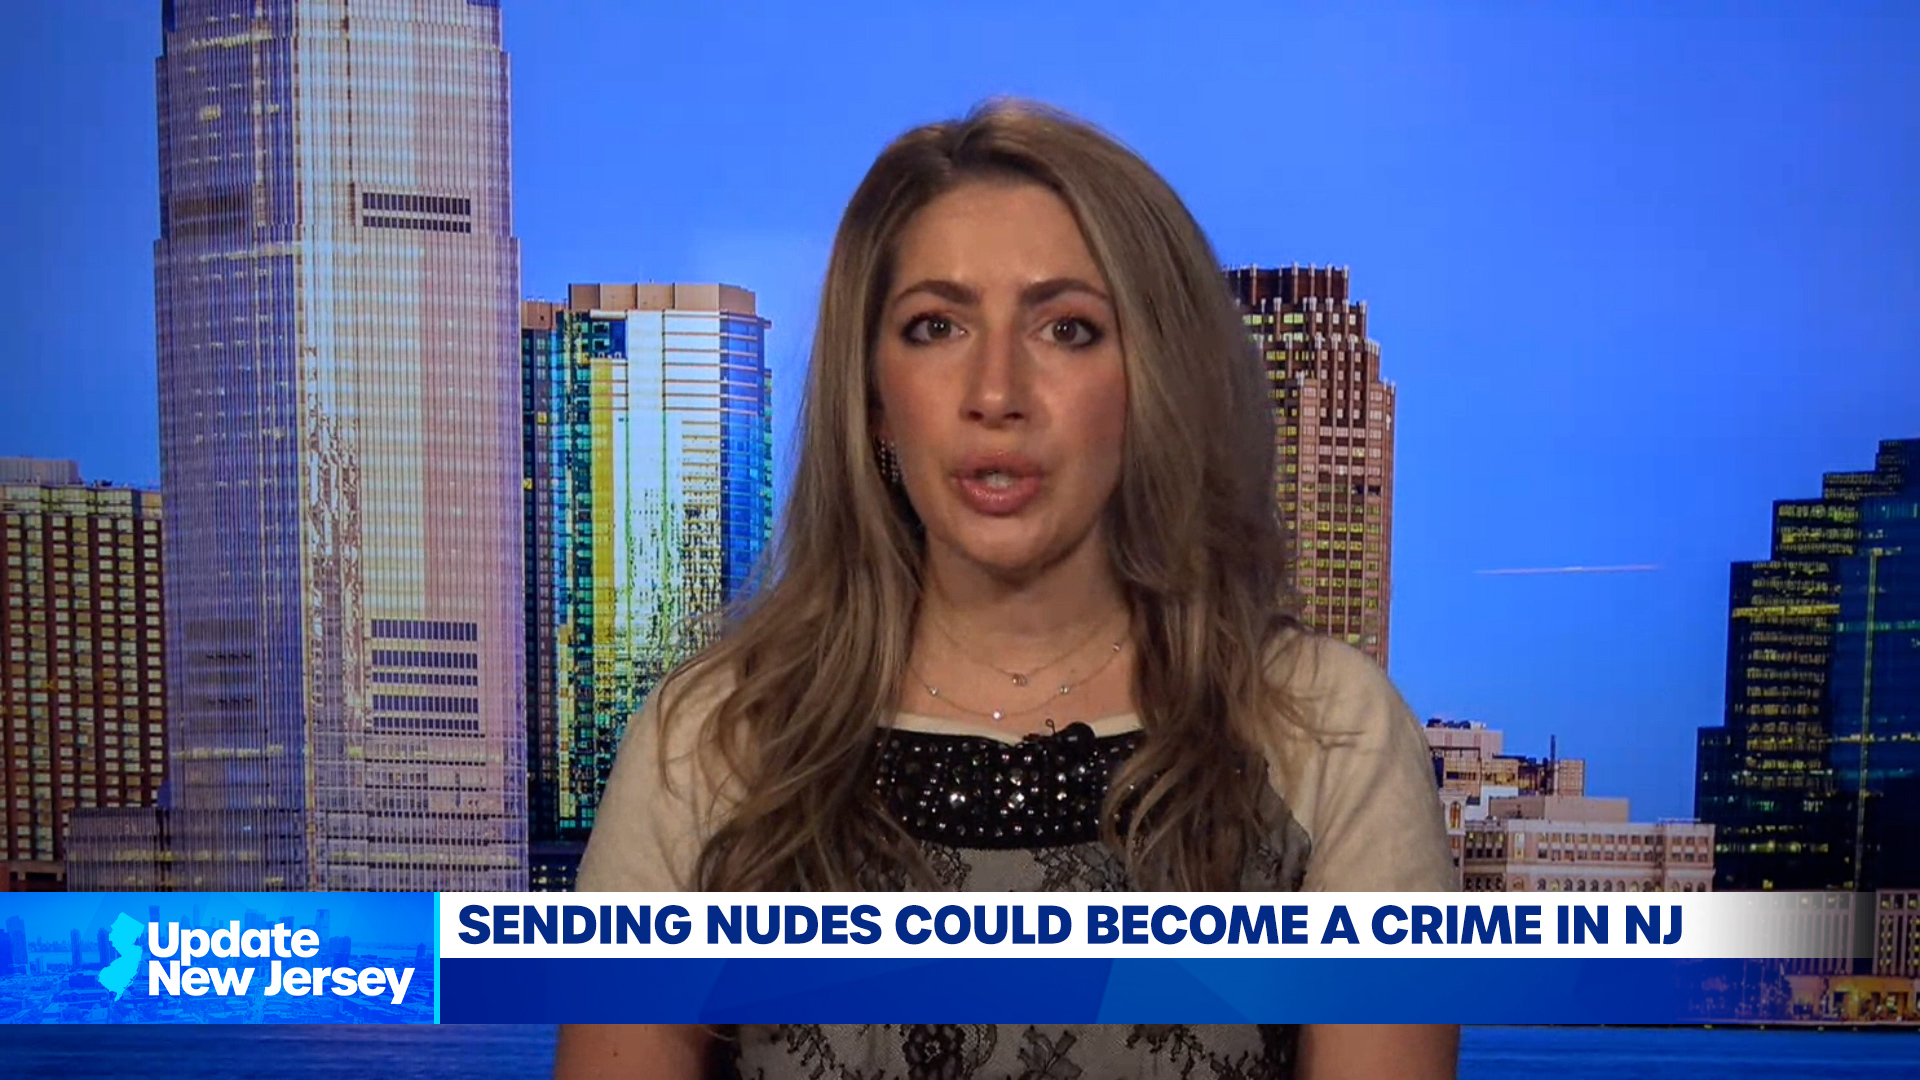 News Update: New Law to Make Sending Nudes a Crime